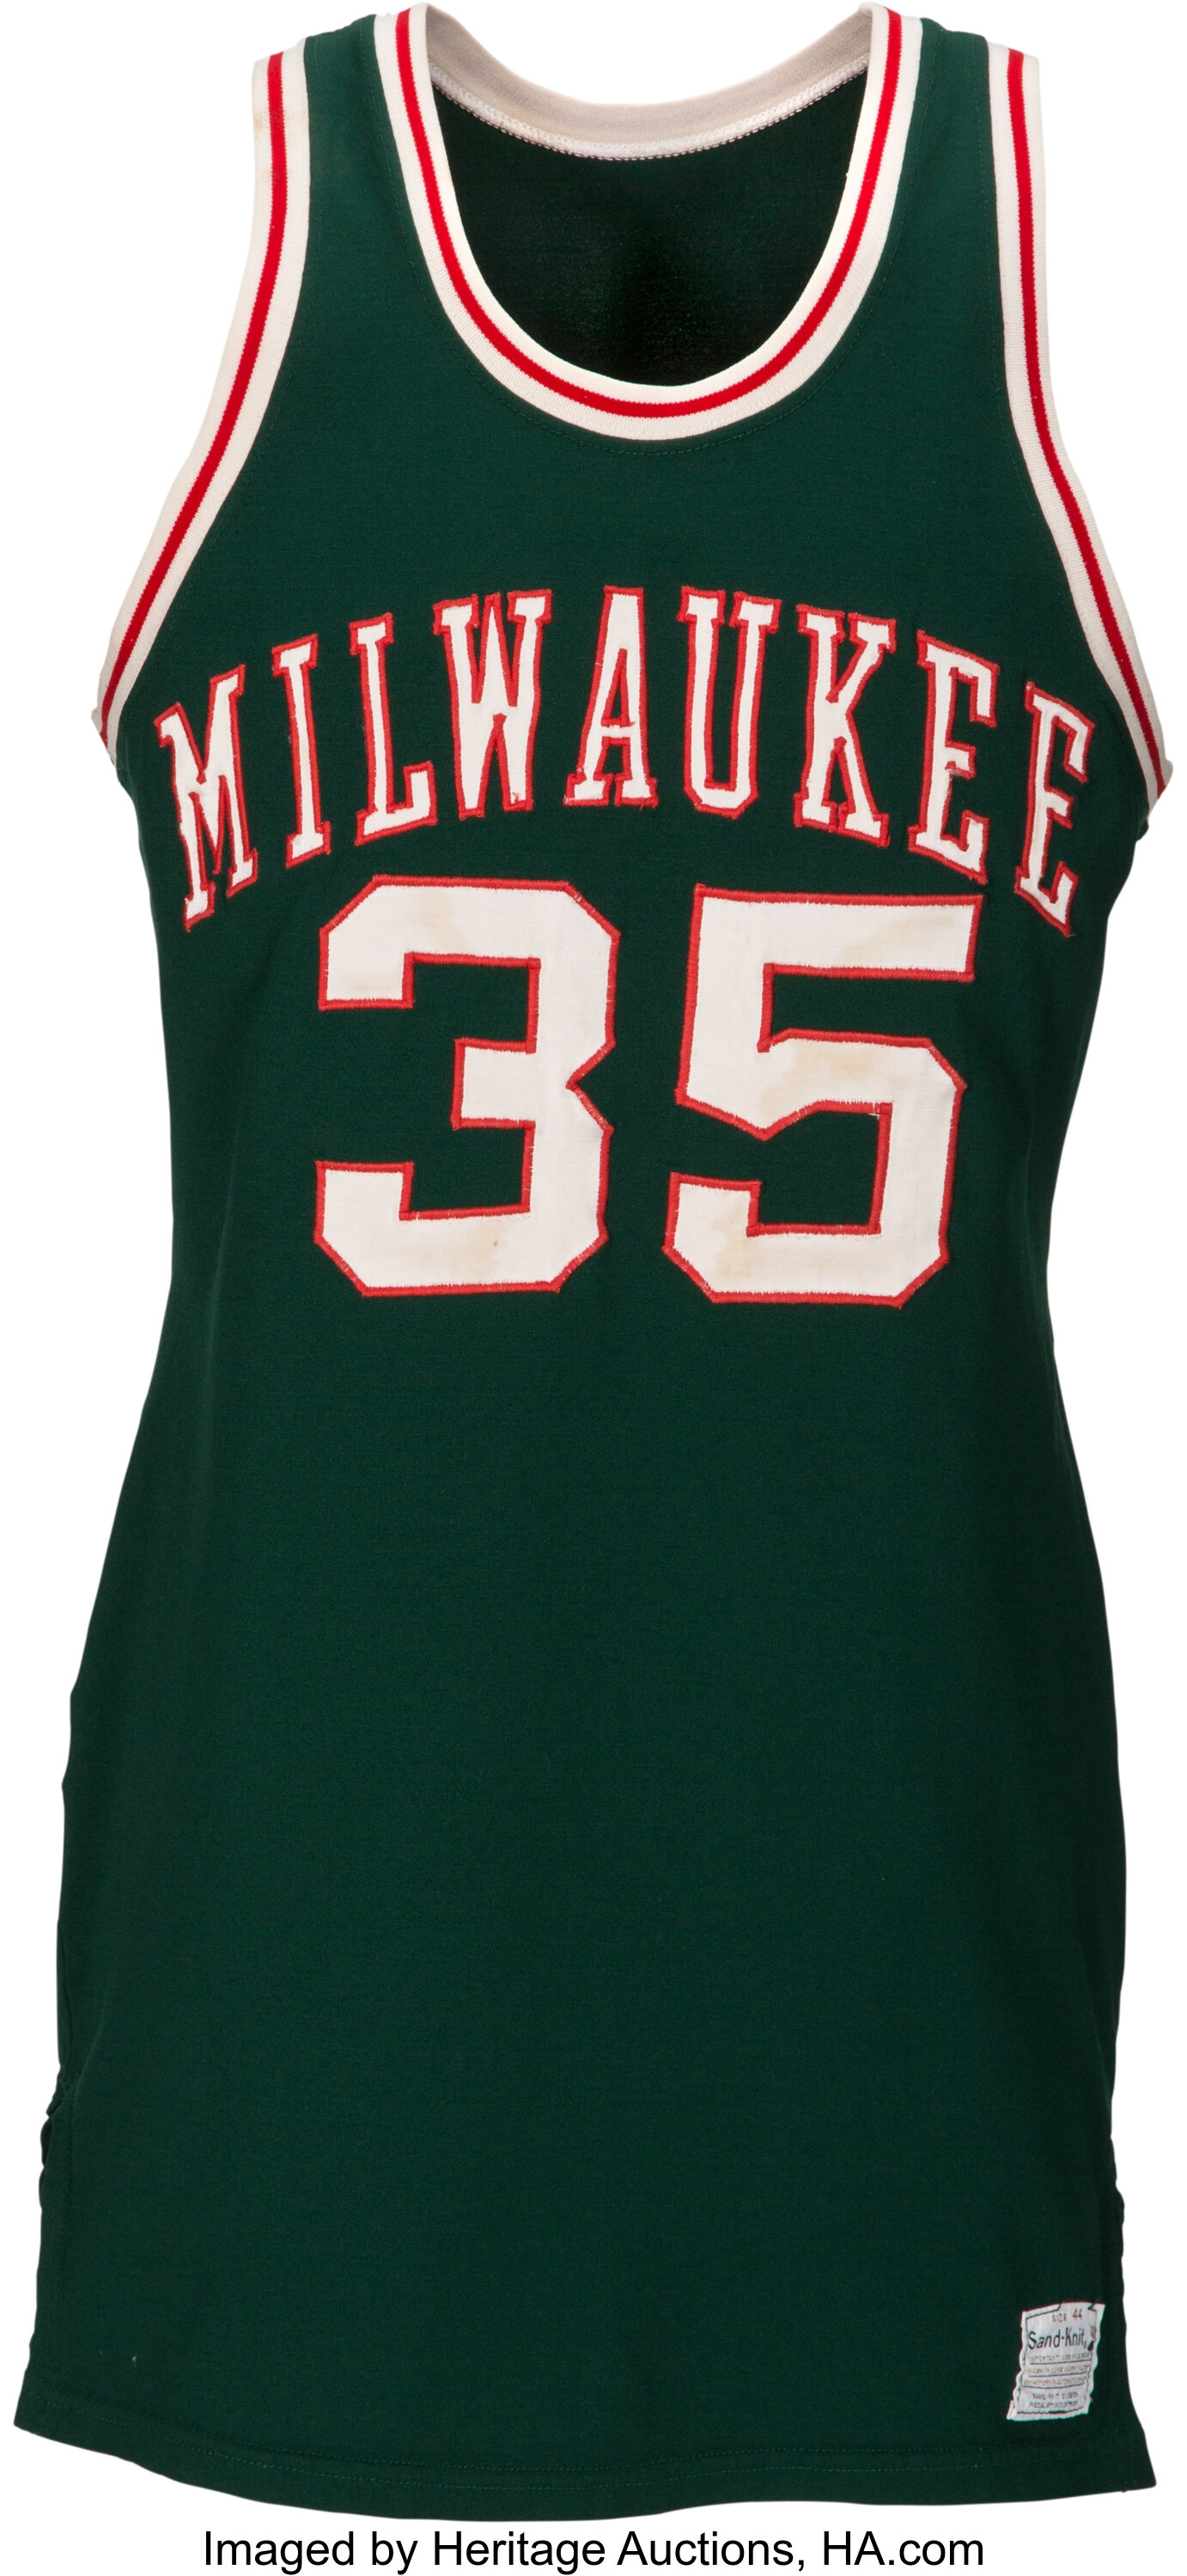 Alcindor's rookie jersey paying off for former Bucks' equipment manager